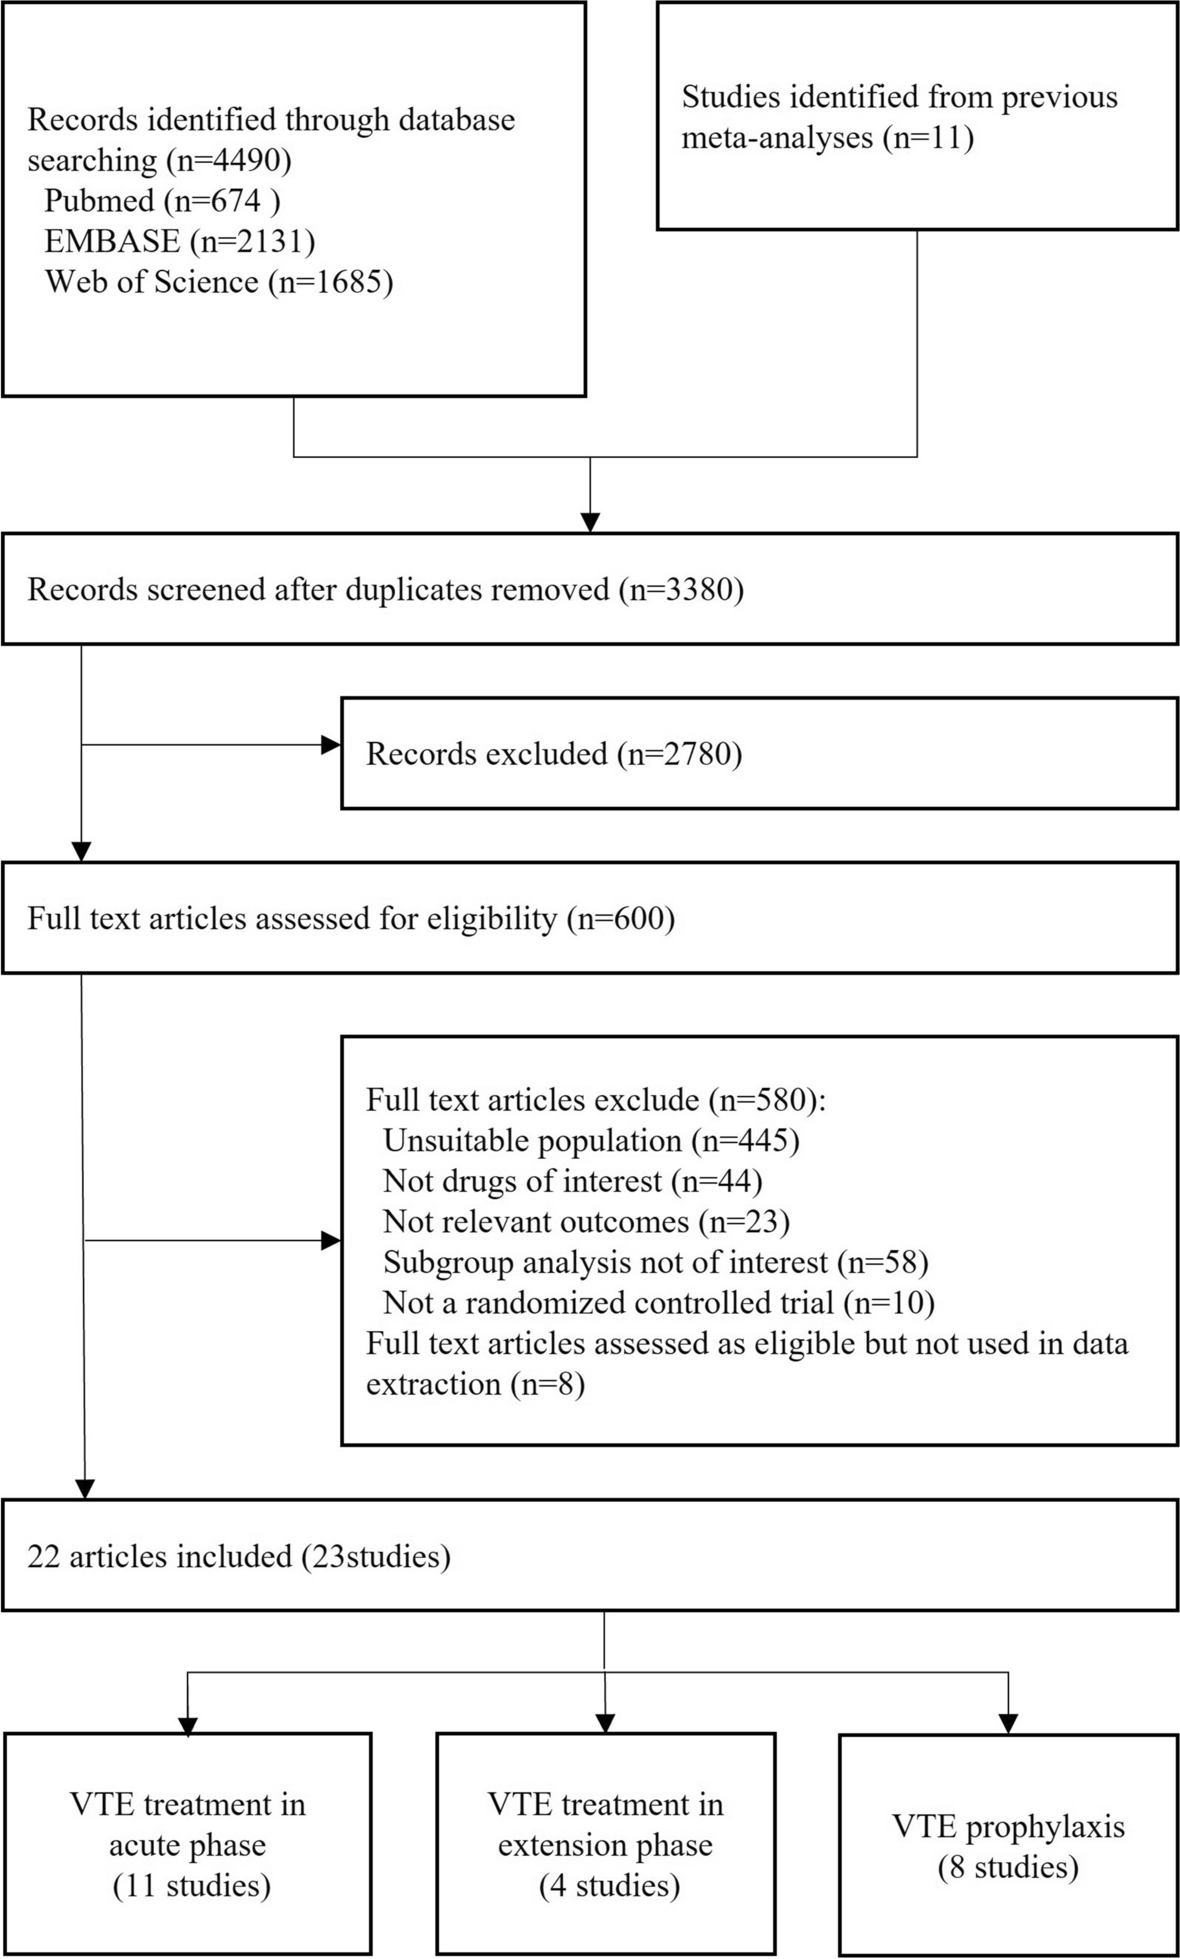 Efficacy and safety of anticoagulant for treatment and prophylaxis of VTE patients with renal insufficiency: a systemic review and meta-analysis